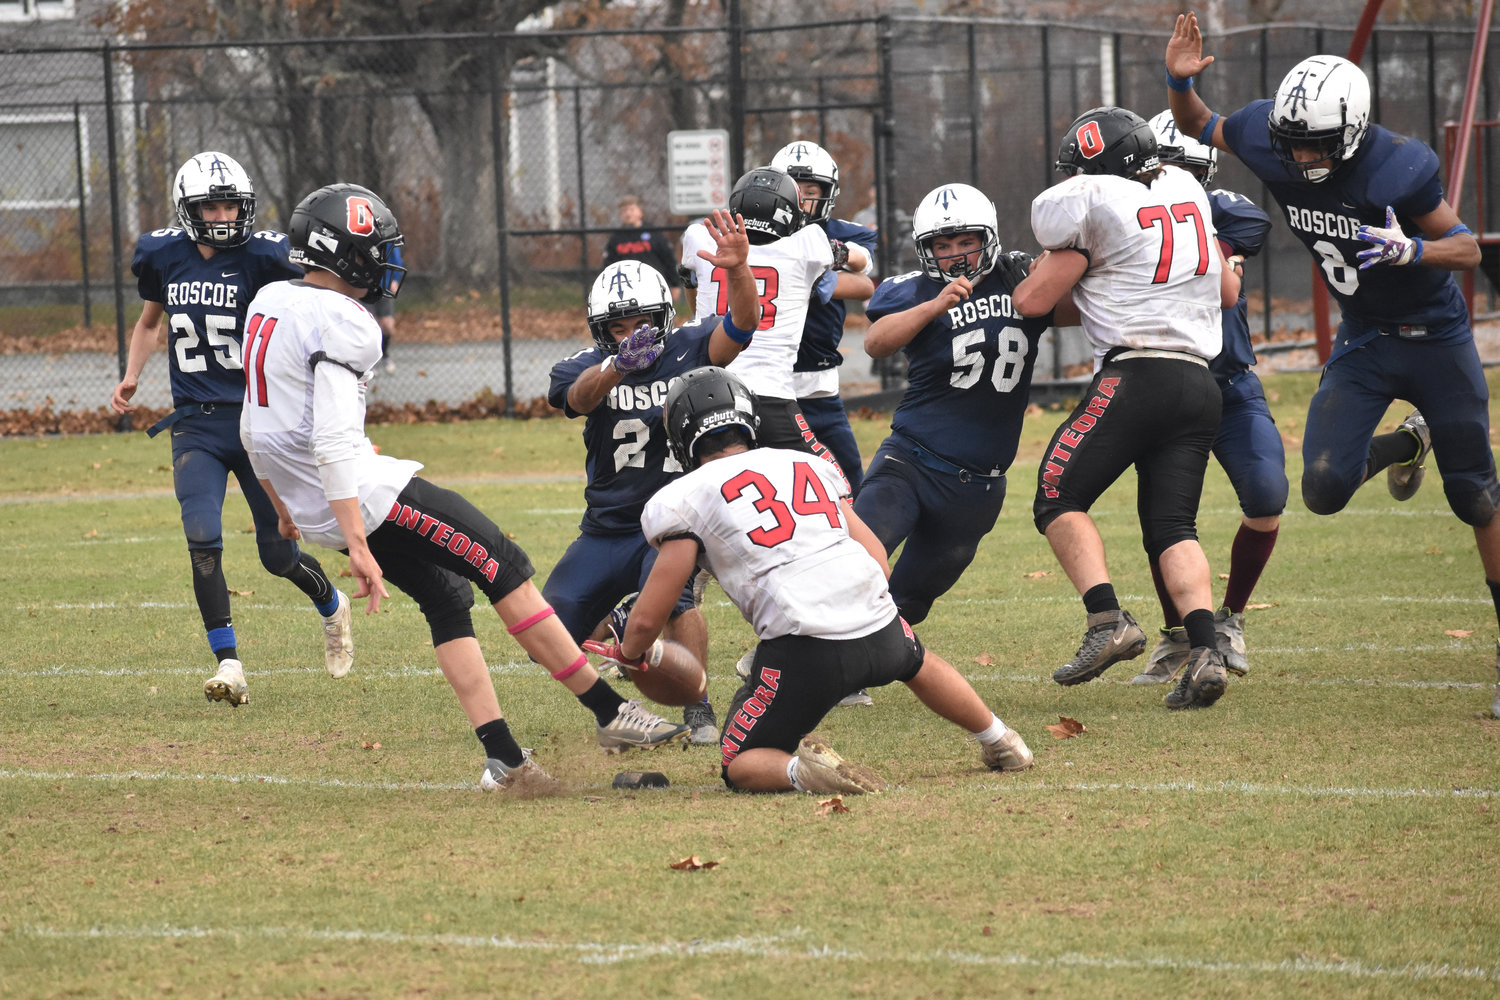 The Blue Devils’ special teams unit blocks an extra point attempt by Onteora.